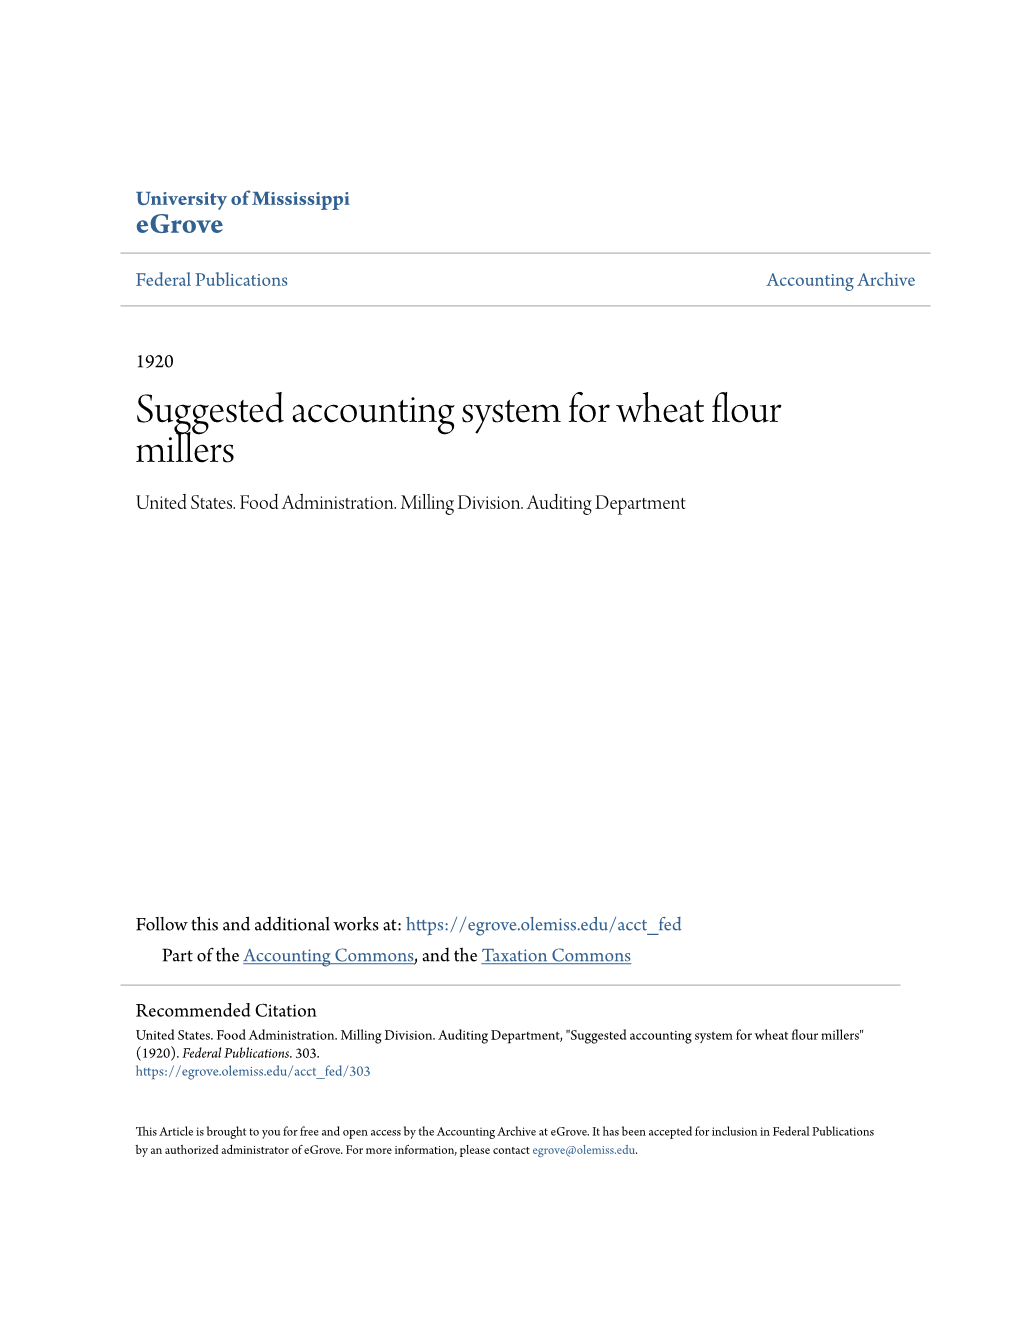 Suggested Accounting System for Wheat Flour Millers United States